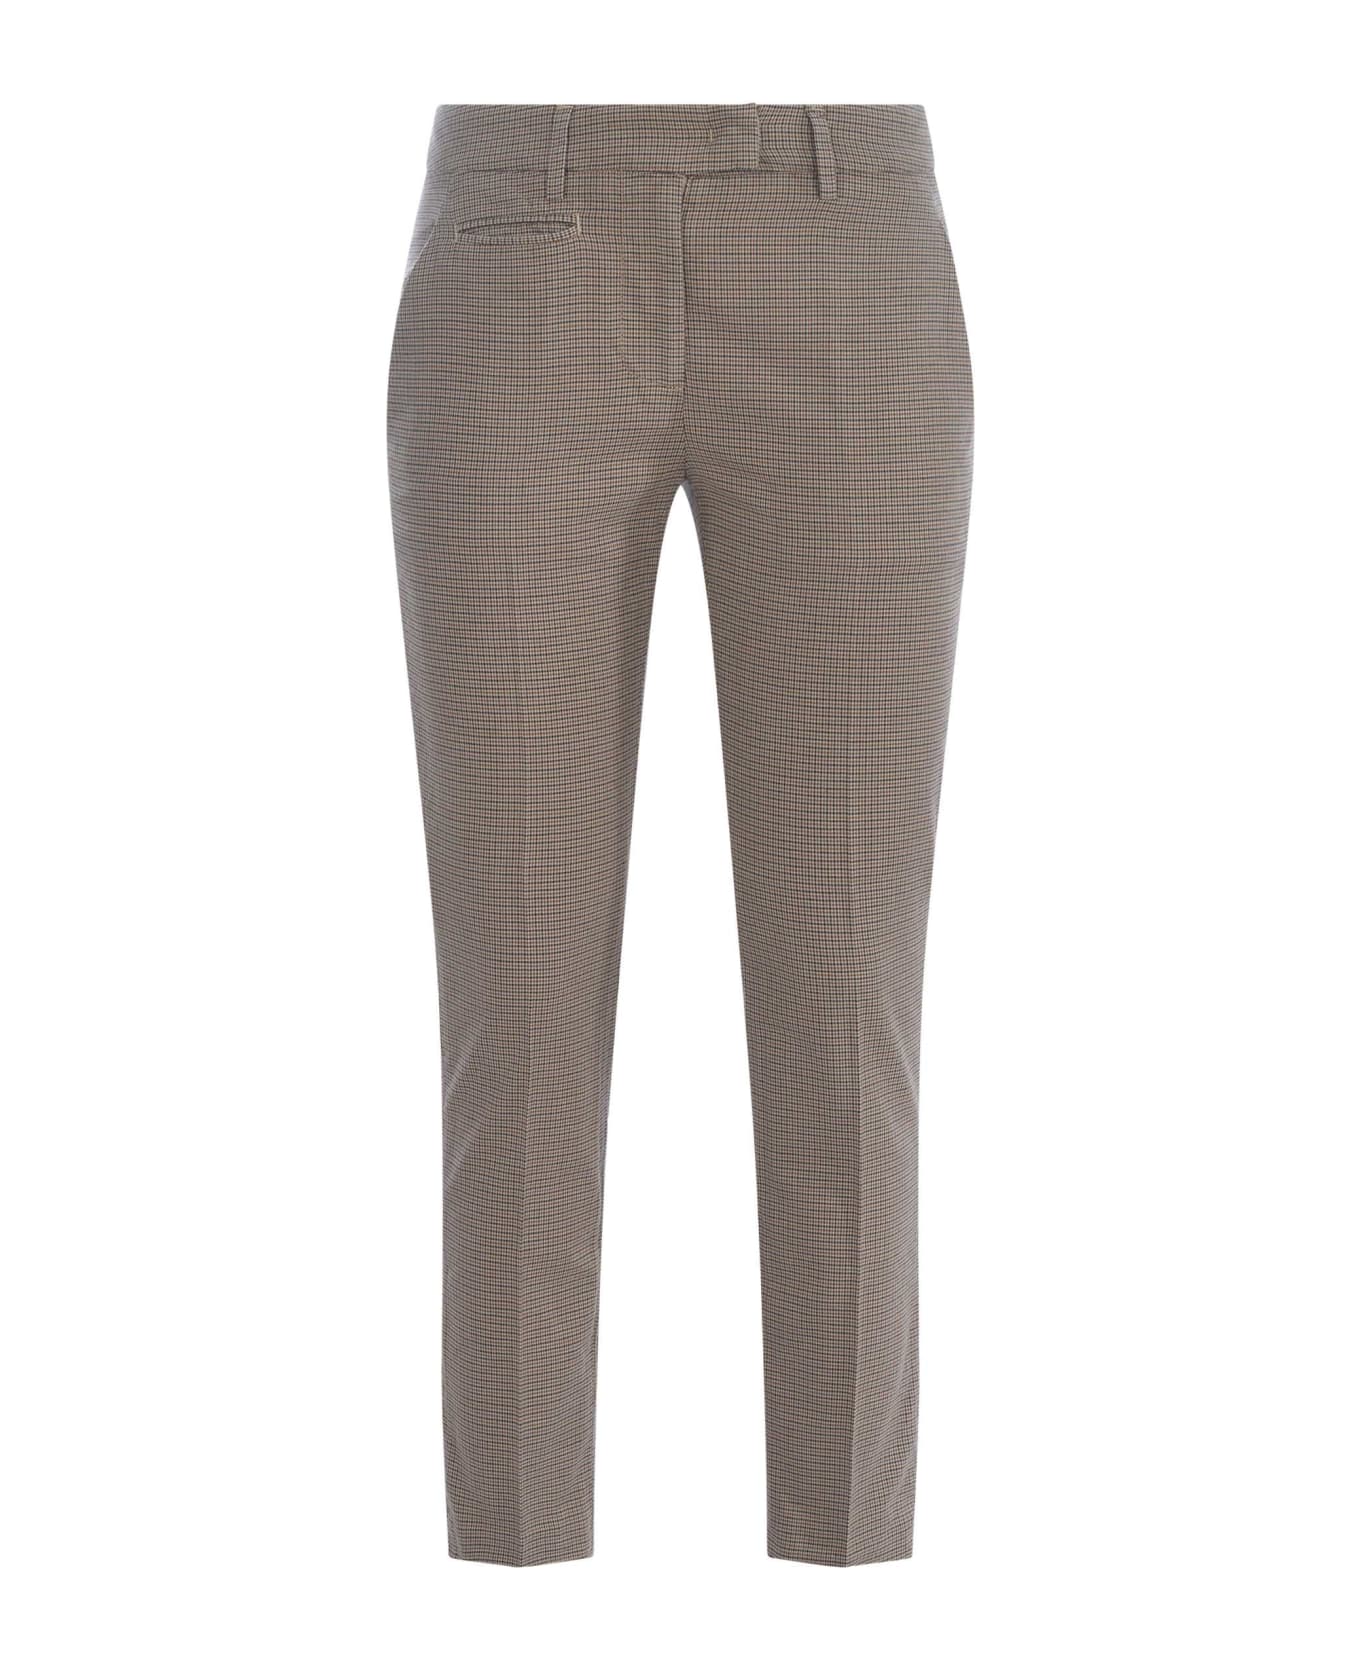 Dondup Trousers Dondup "perfect" In Houndstooth - Beige